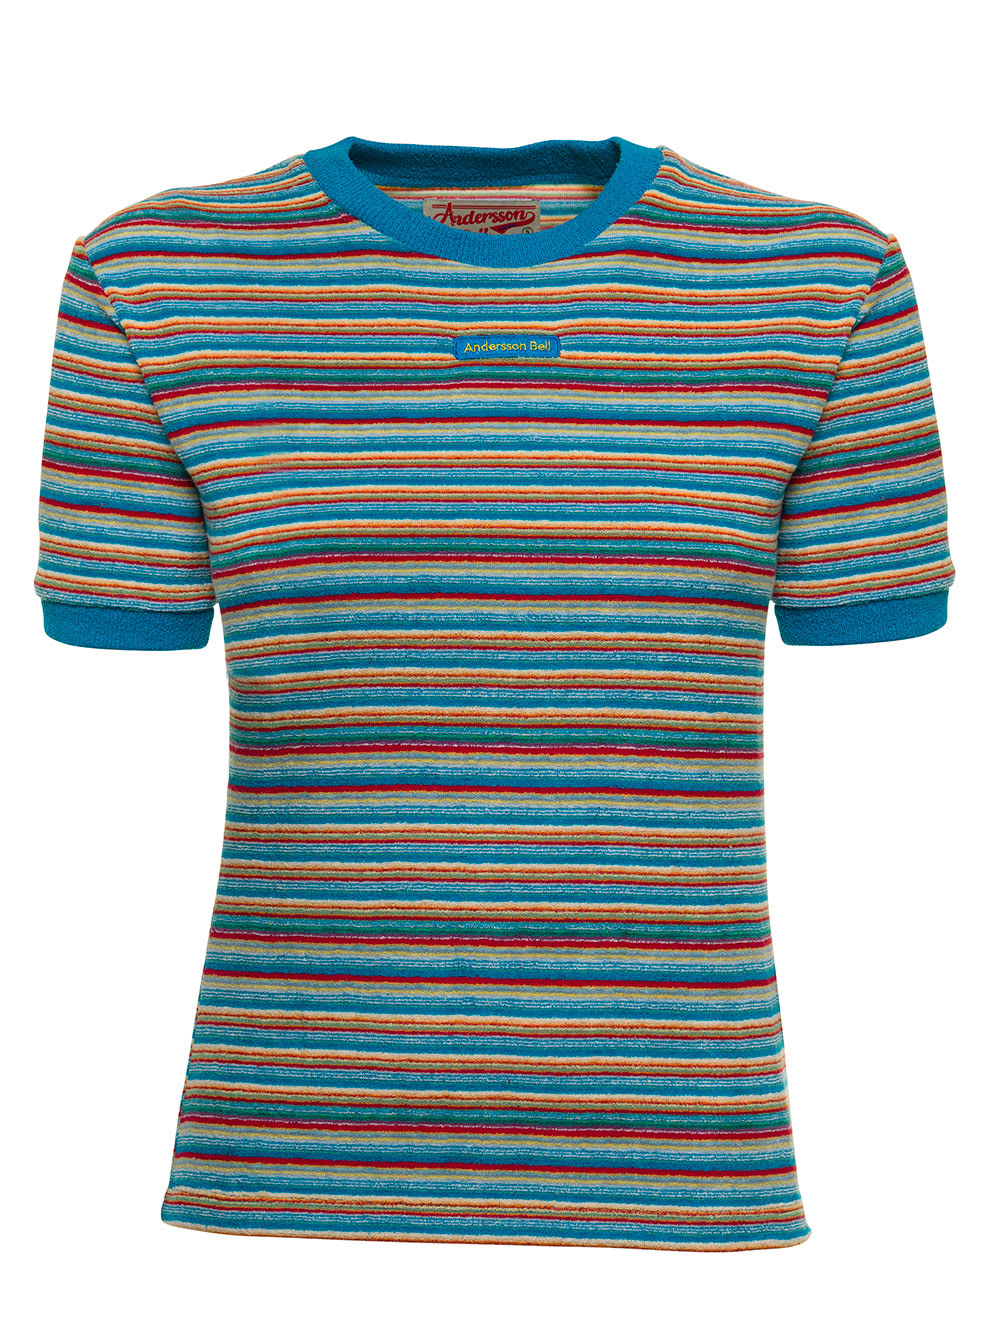 Andersson Bell Woman Multicolor Striped Cotton T-shirt